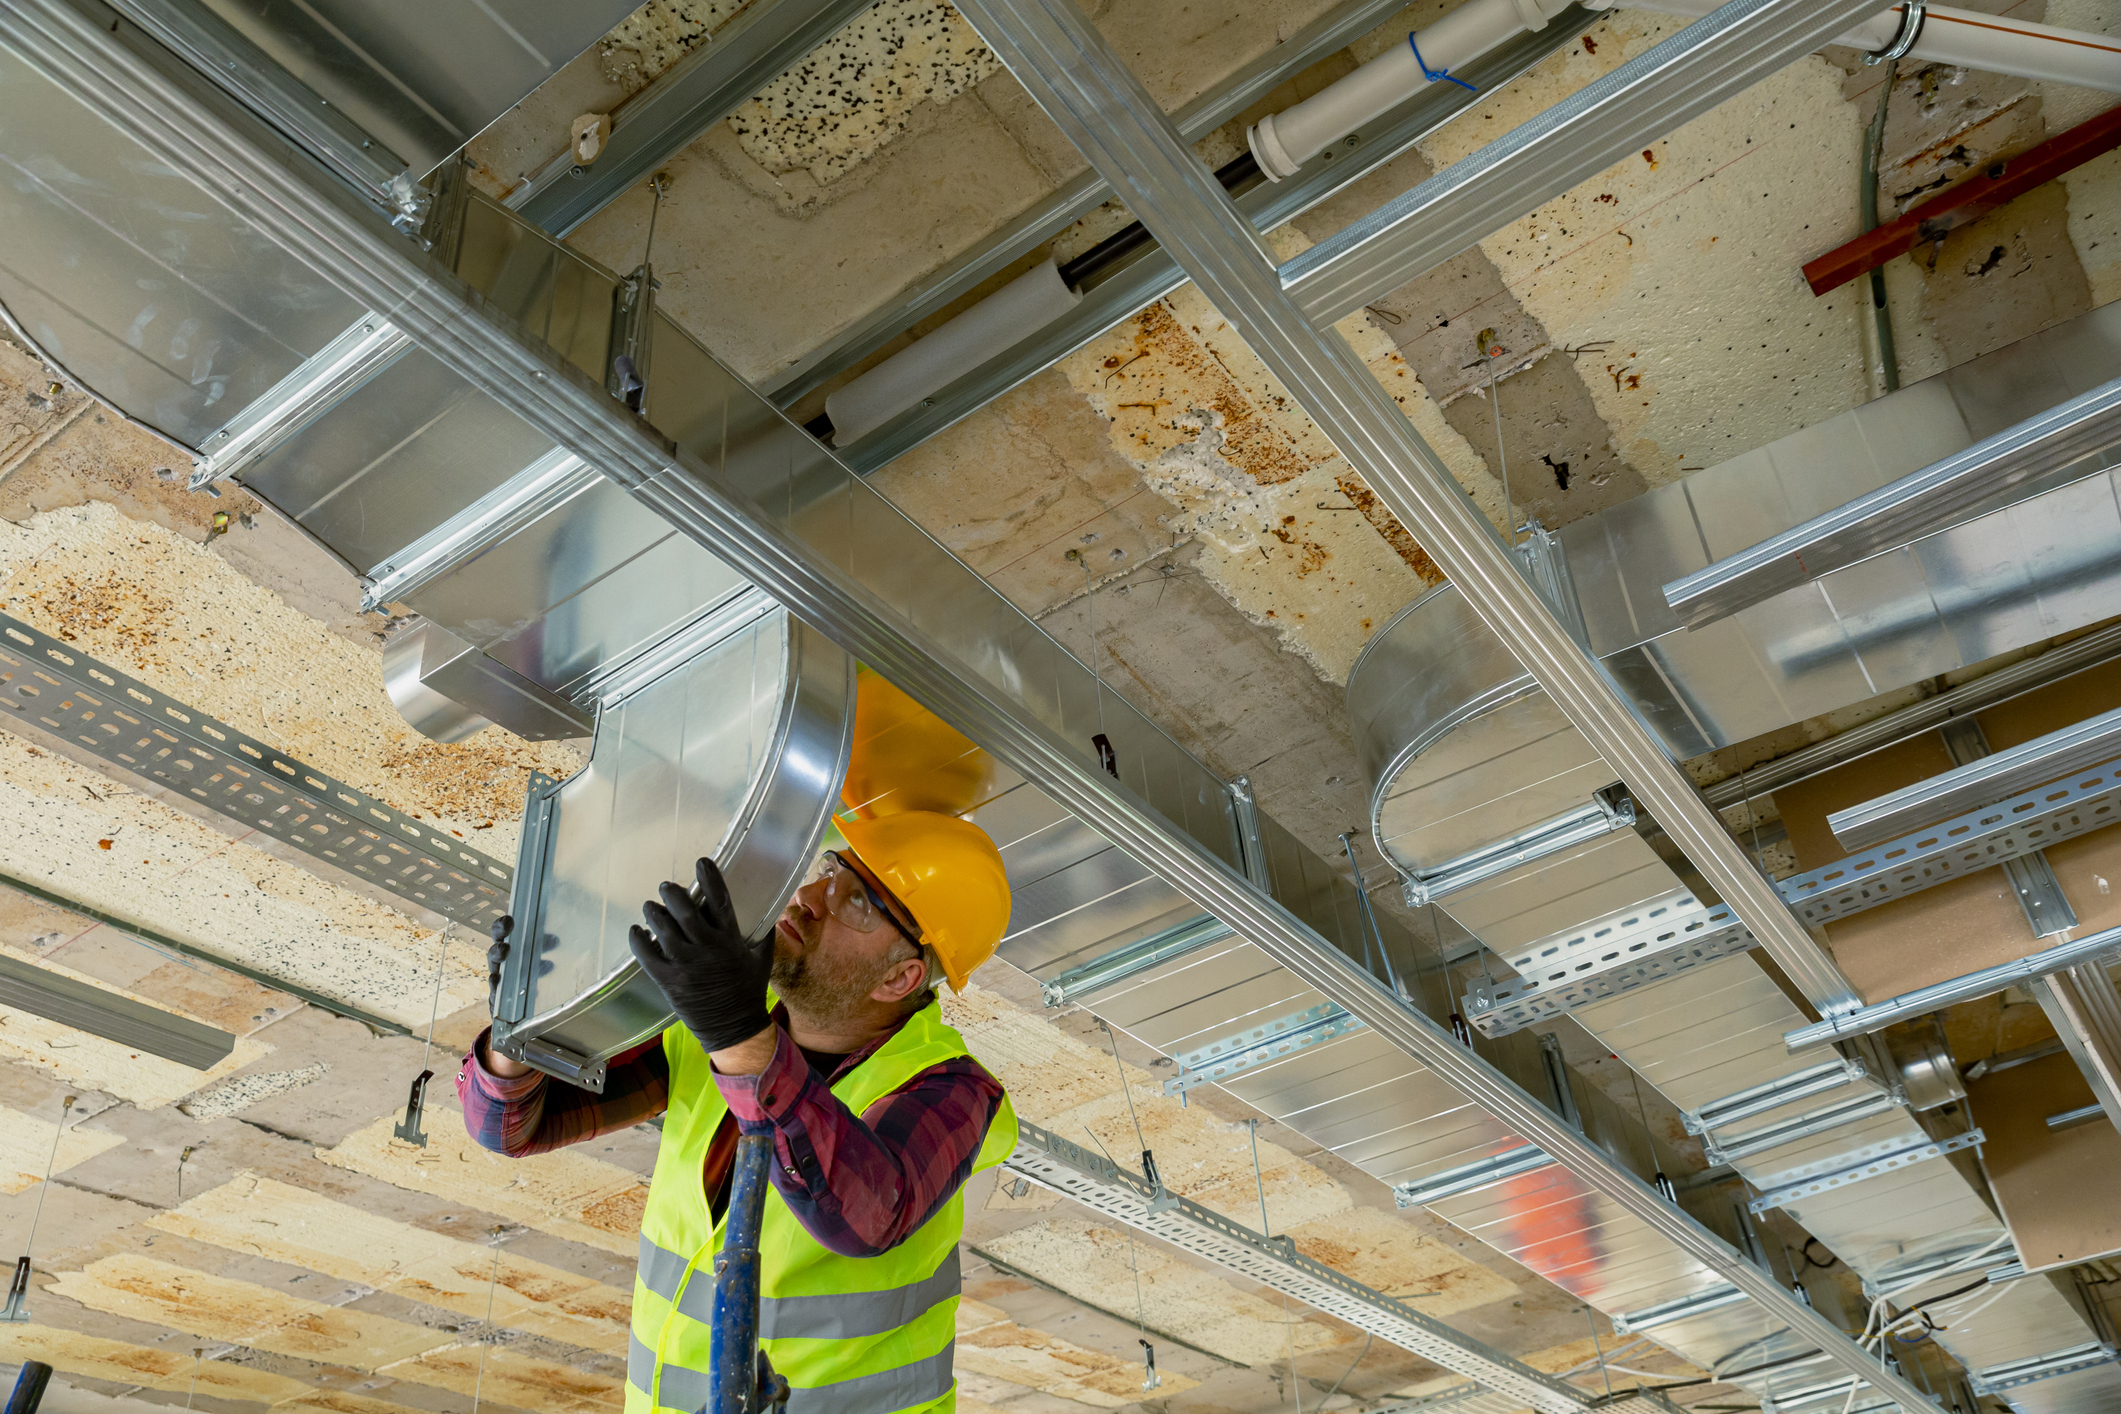 Worker in hard hat installing ductwork overhead on a construction site